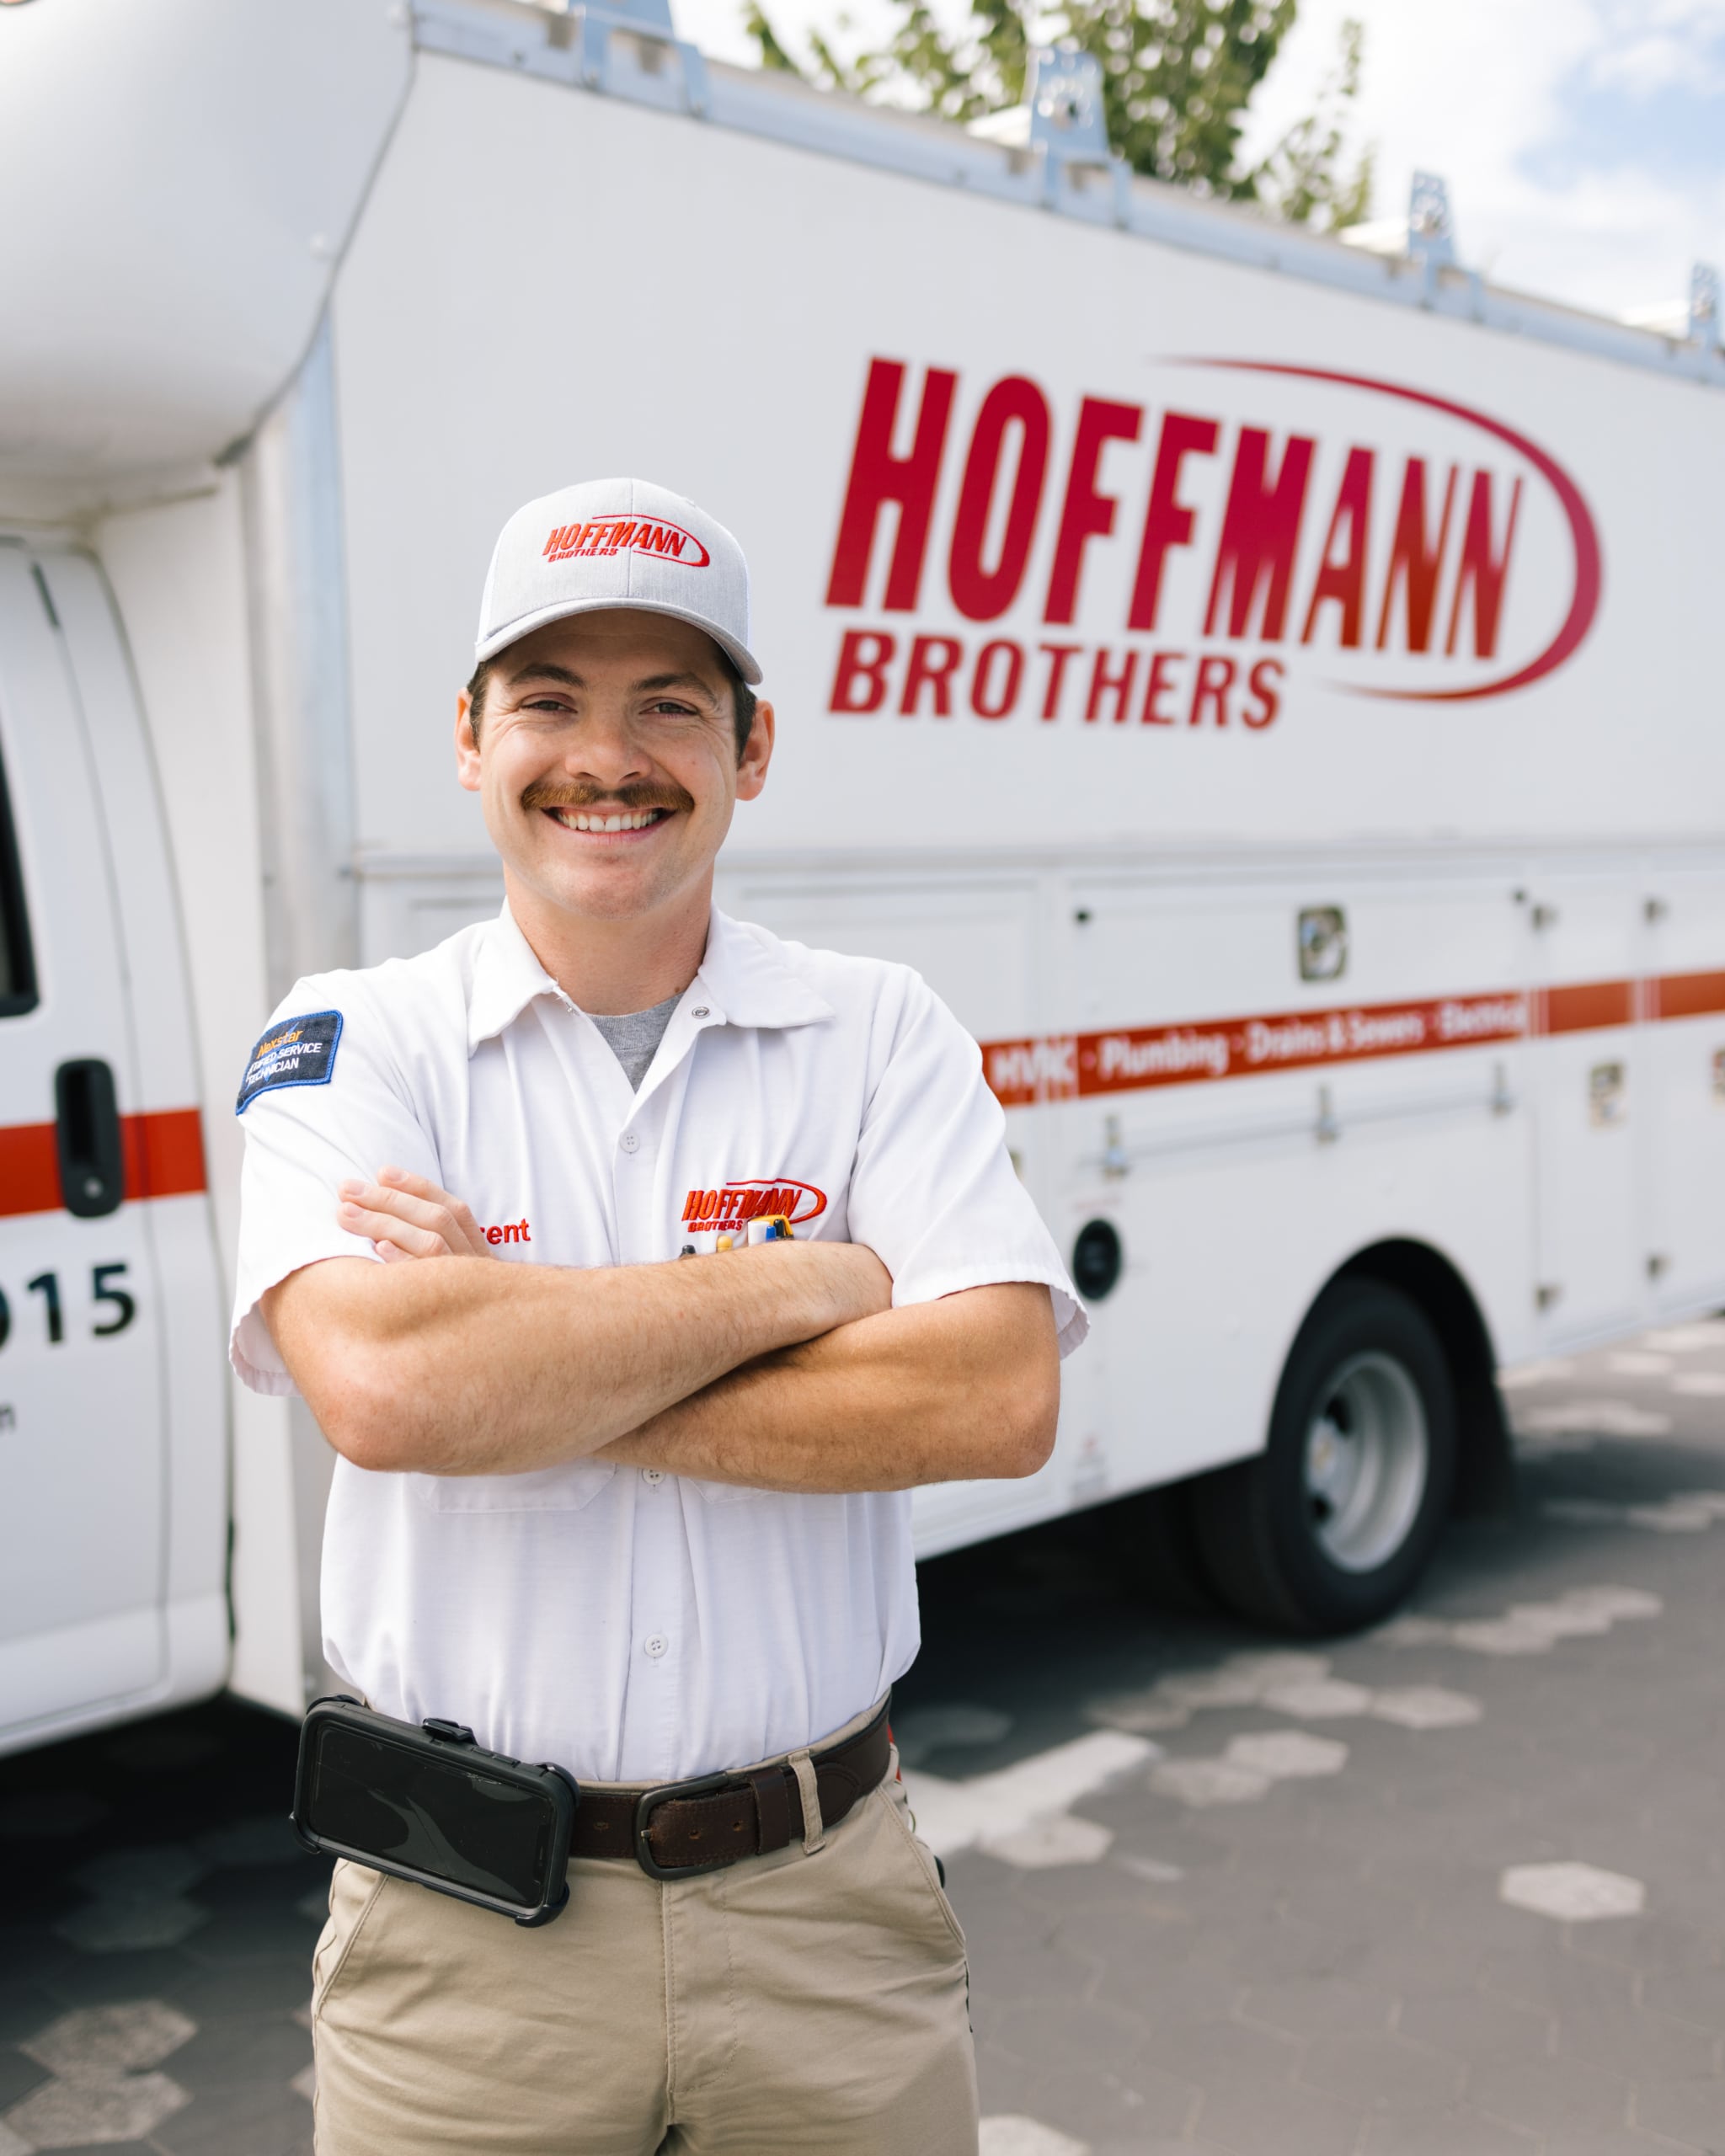 Hoffmann Brothers' Certified Technicians Ensuring Precision In Ductless Services, Nashville